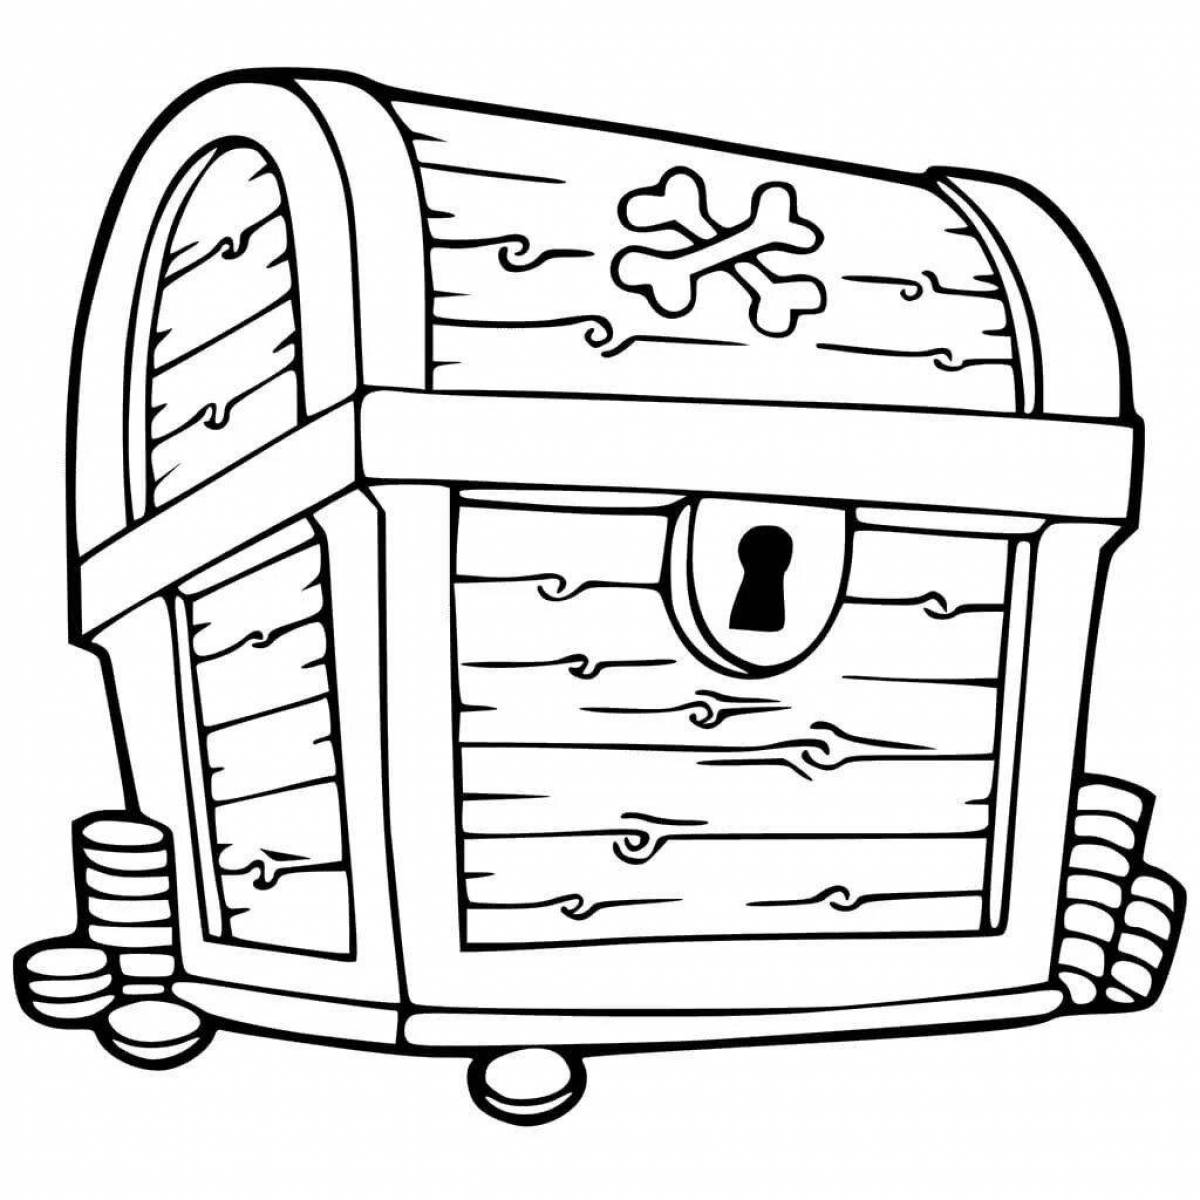 Rampant treasure chest coloring page